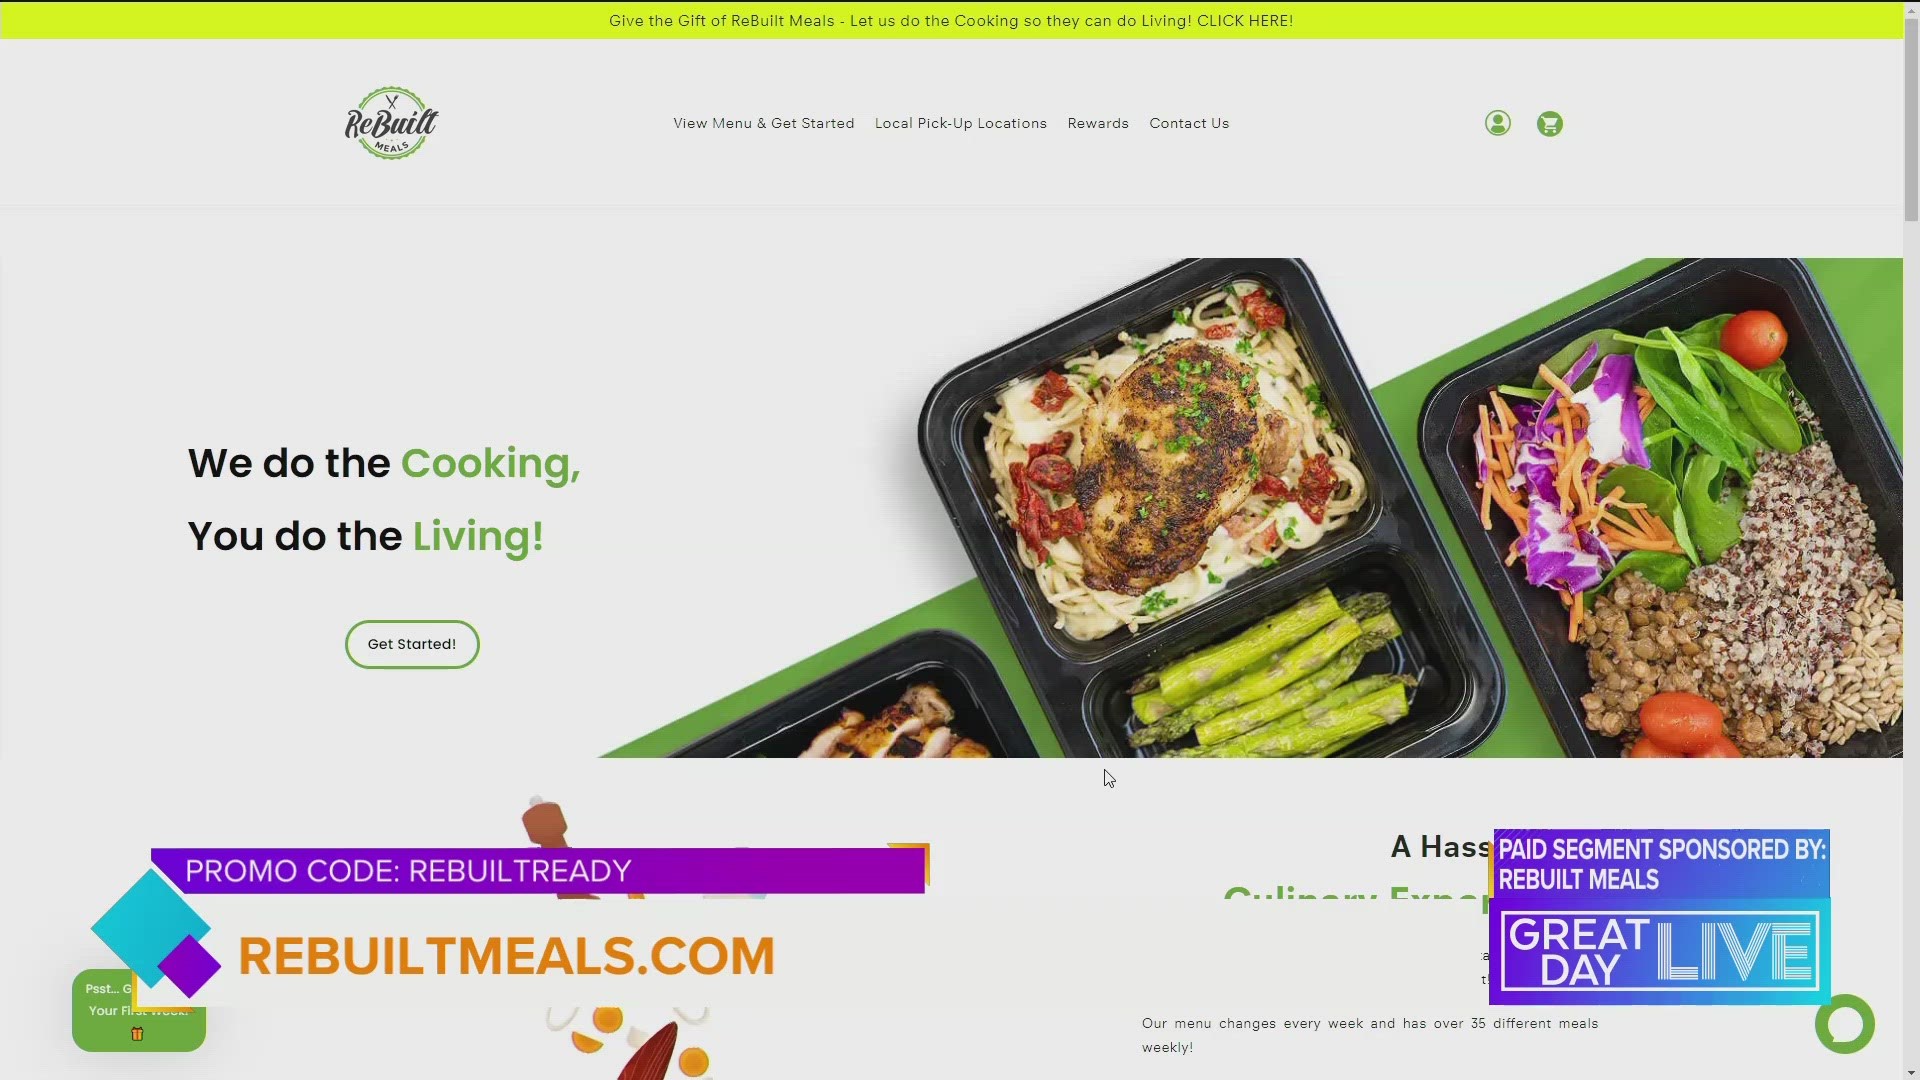 PAID SEGMENT SPONSORED BY: Rebuilt Meals